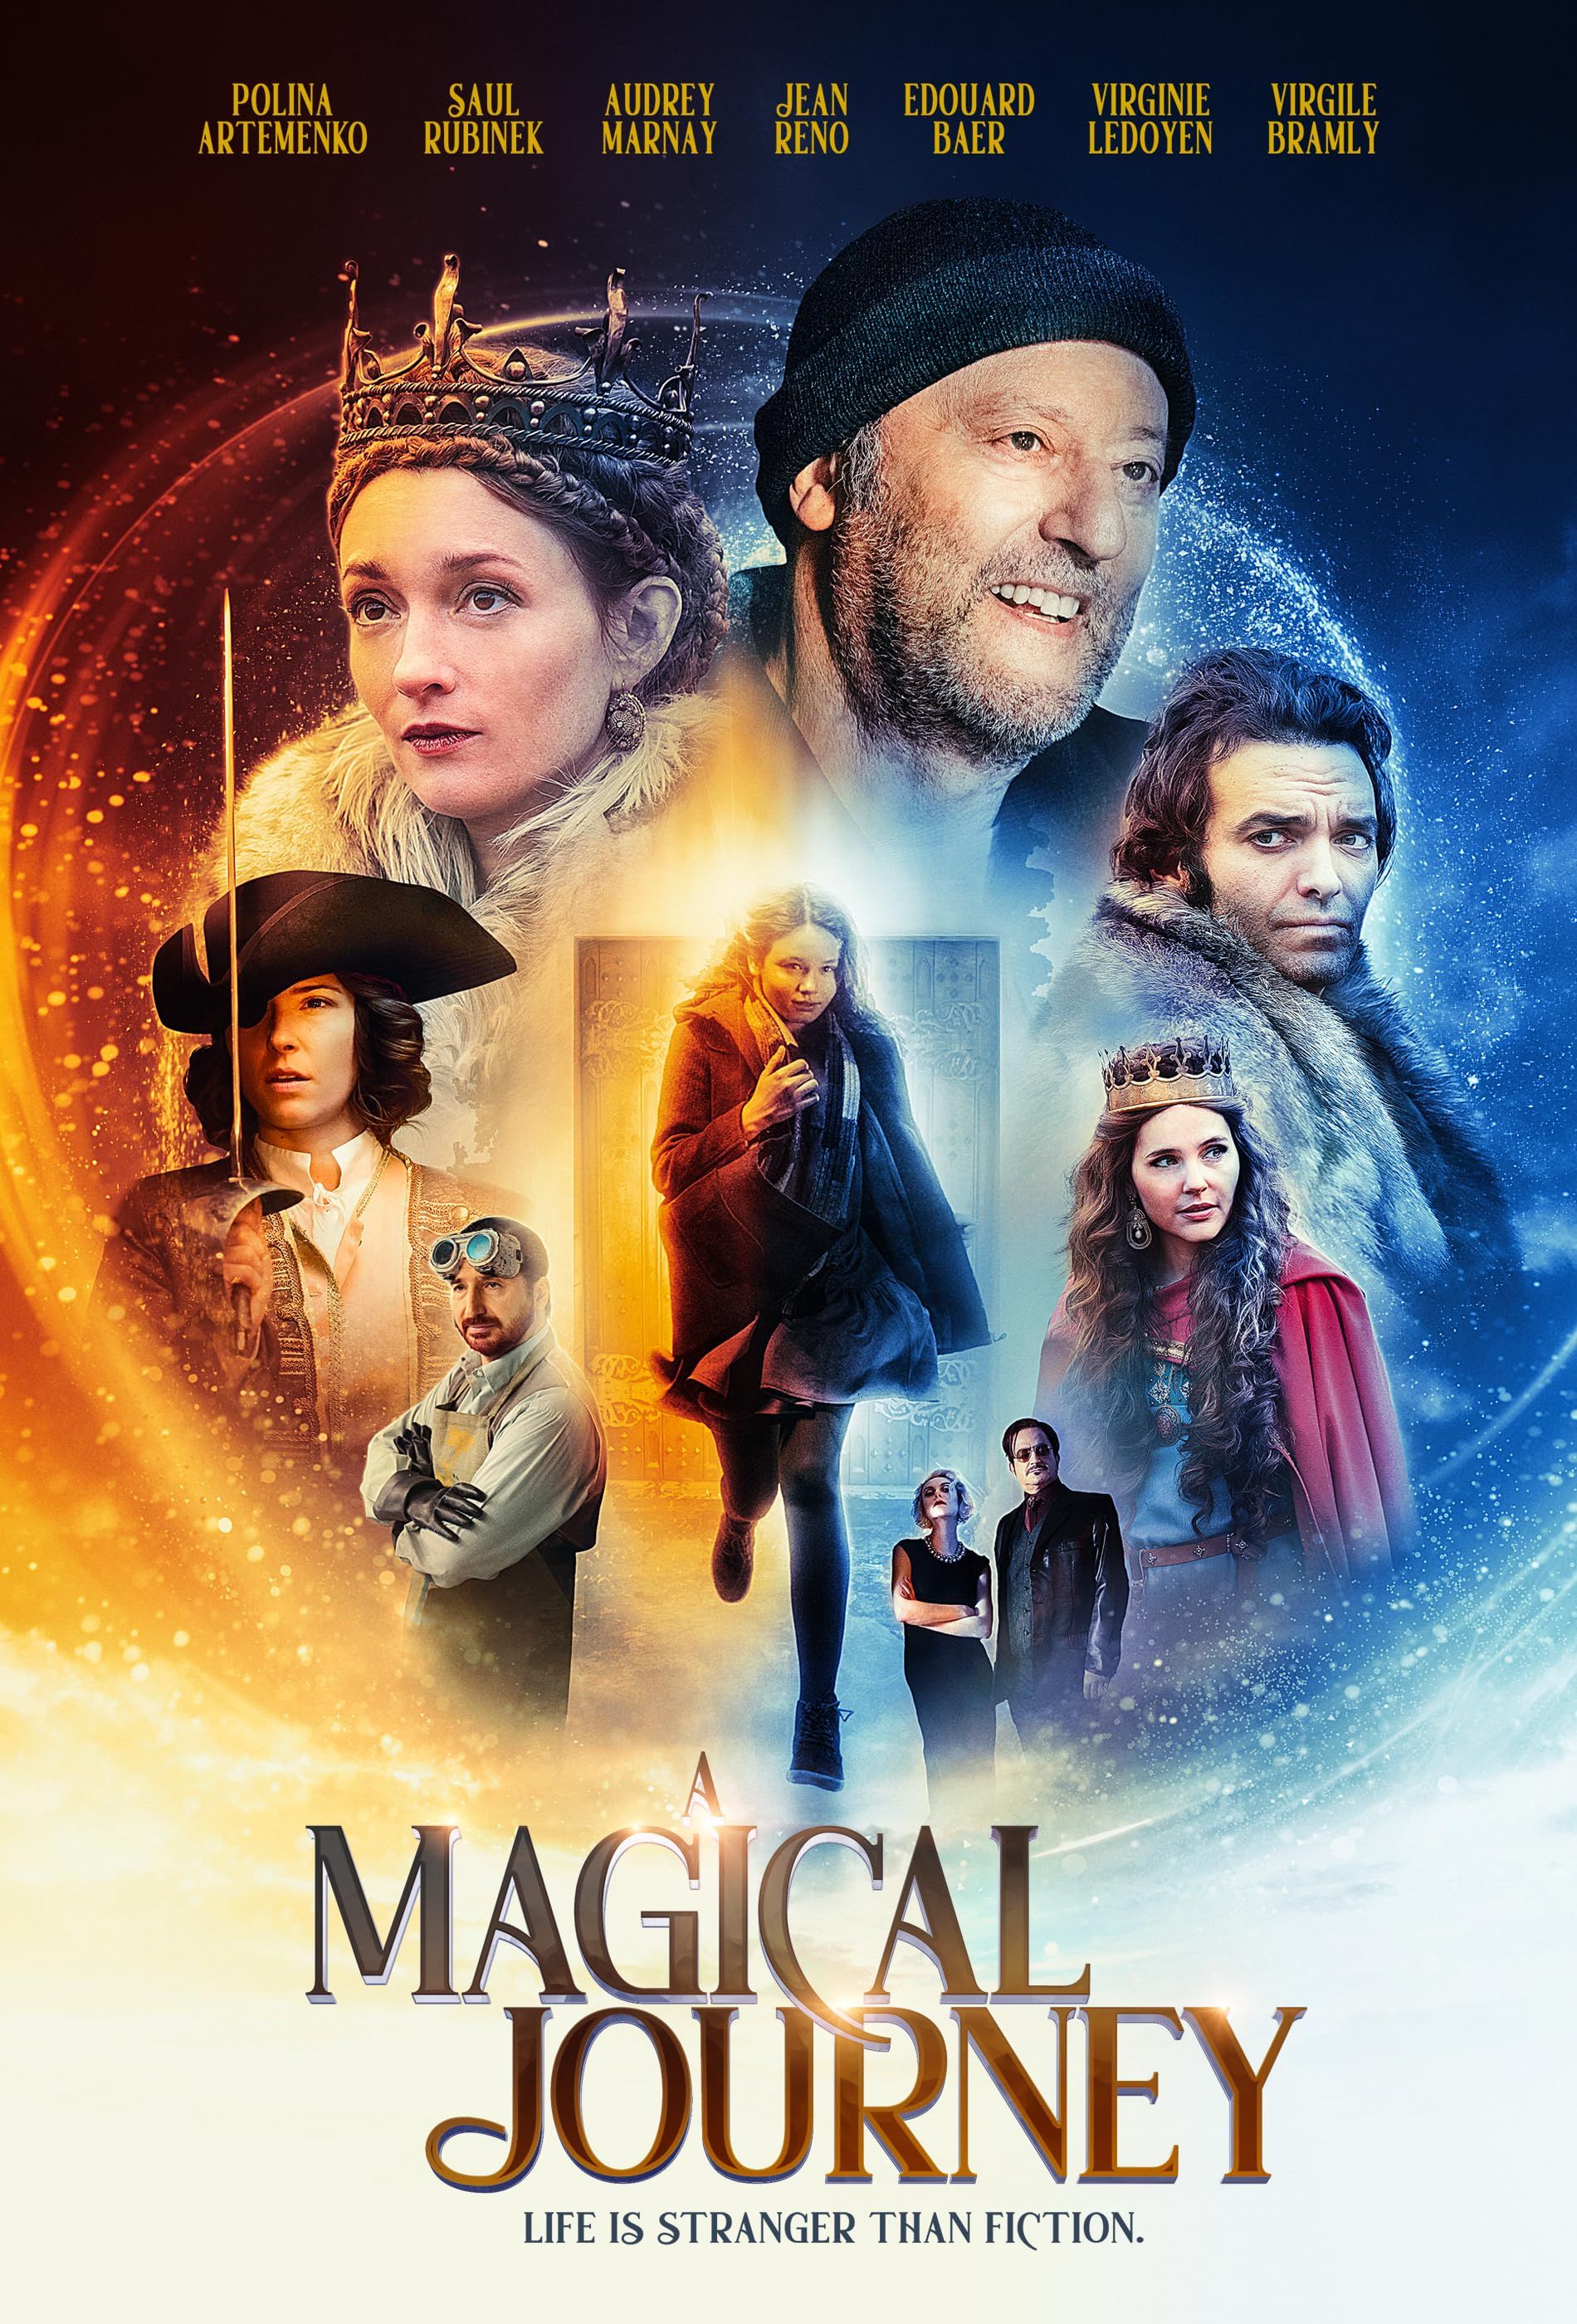 A Magical Journey (2019) Hindi Dubbed [ORG]